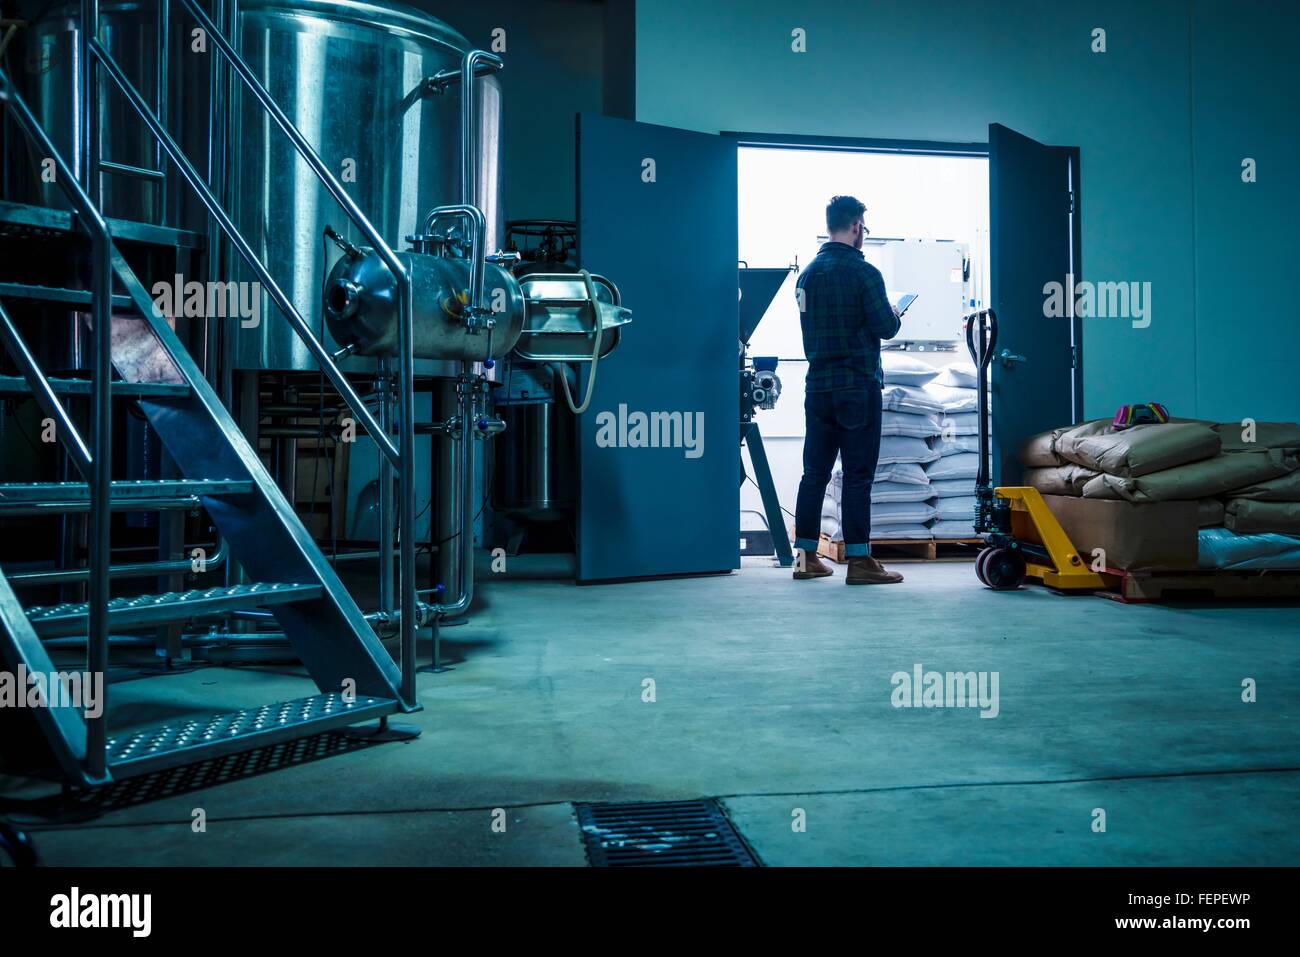 Full length rear view of young man in brewery storage room using digital tablet Stock Photo